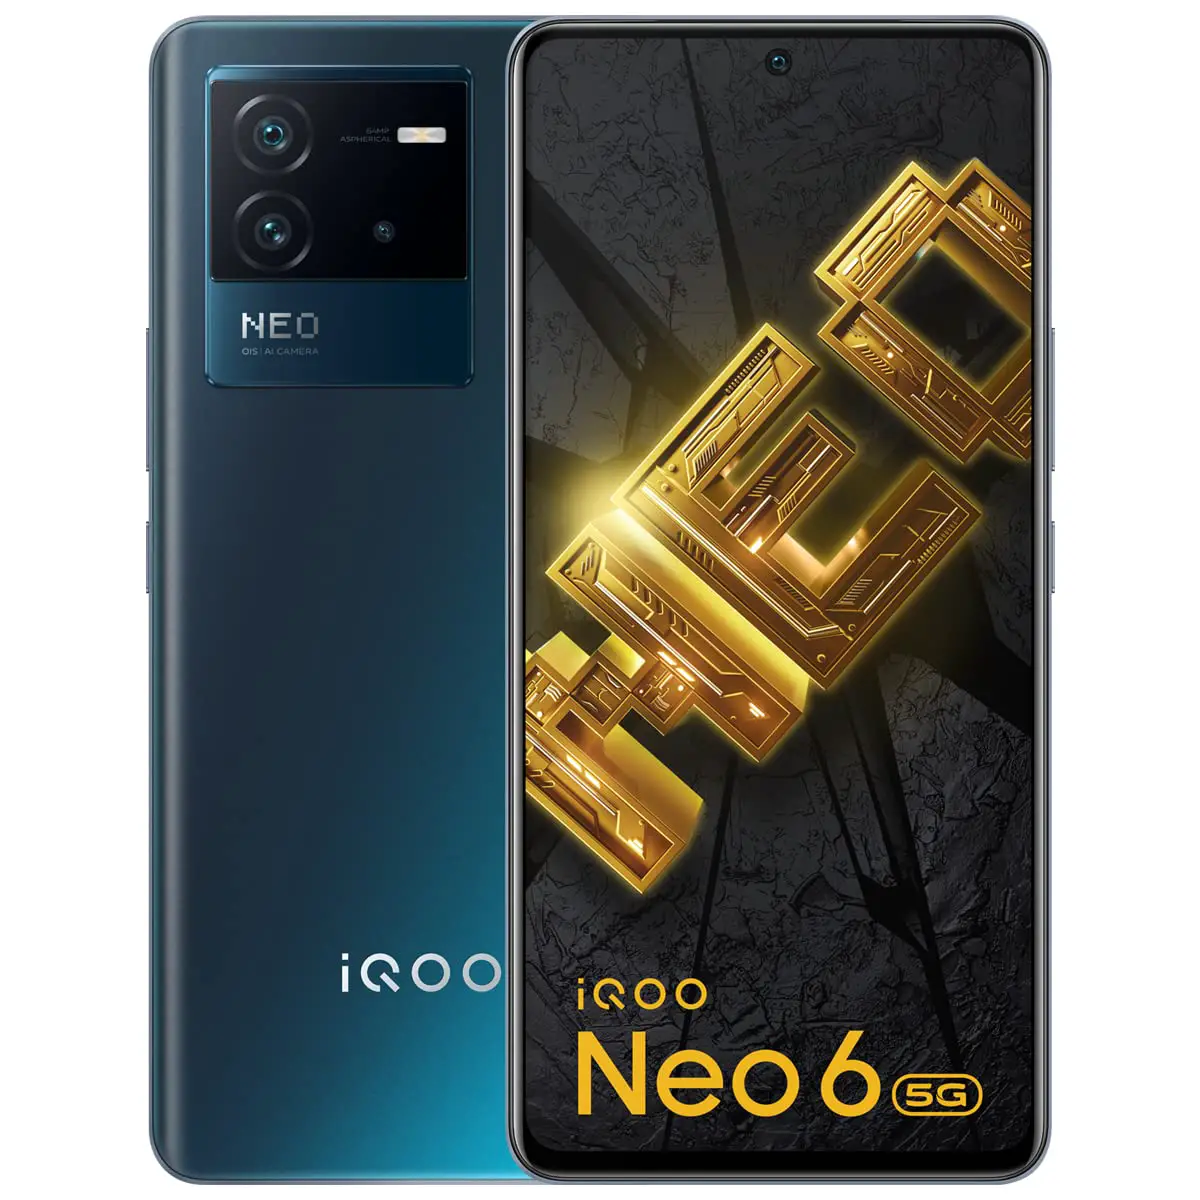 How to Unlock IQOO Neo 6 Mobile Phone? Forgot Password or Pattern